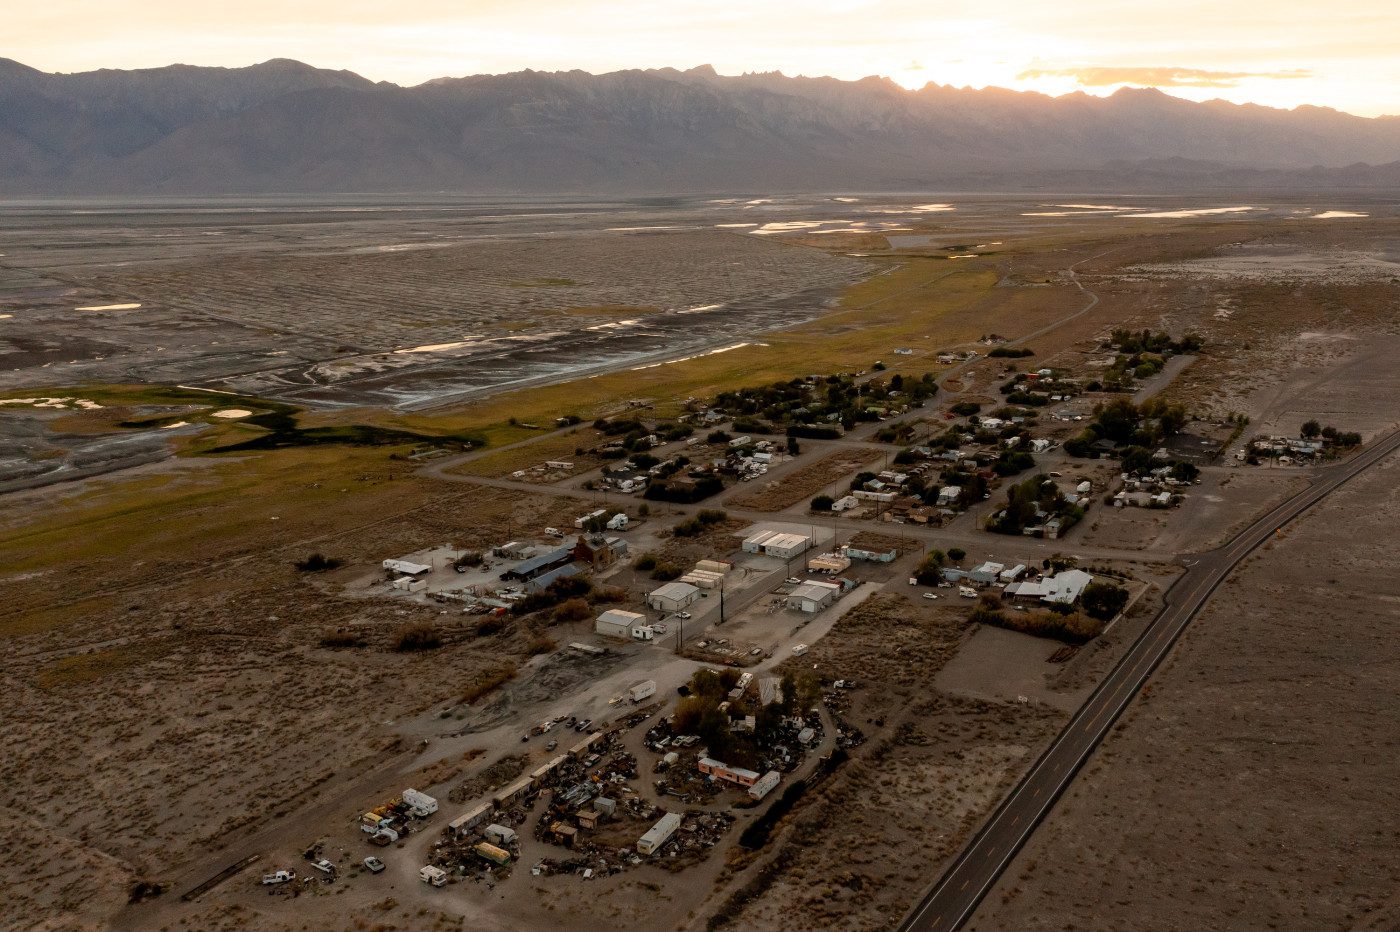 The small community of Keeler is pictured with the dry lakebed of Owens Lake in the background in Inyo County, California, on Thursday, Aug. 11, 2022. Spenser Heaps, Deseret News